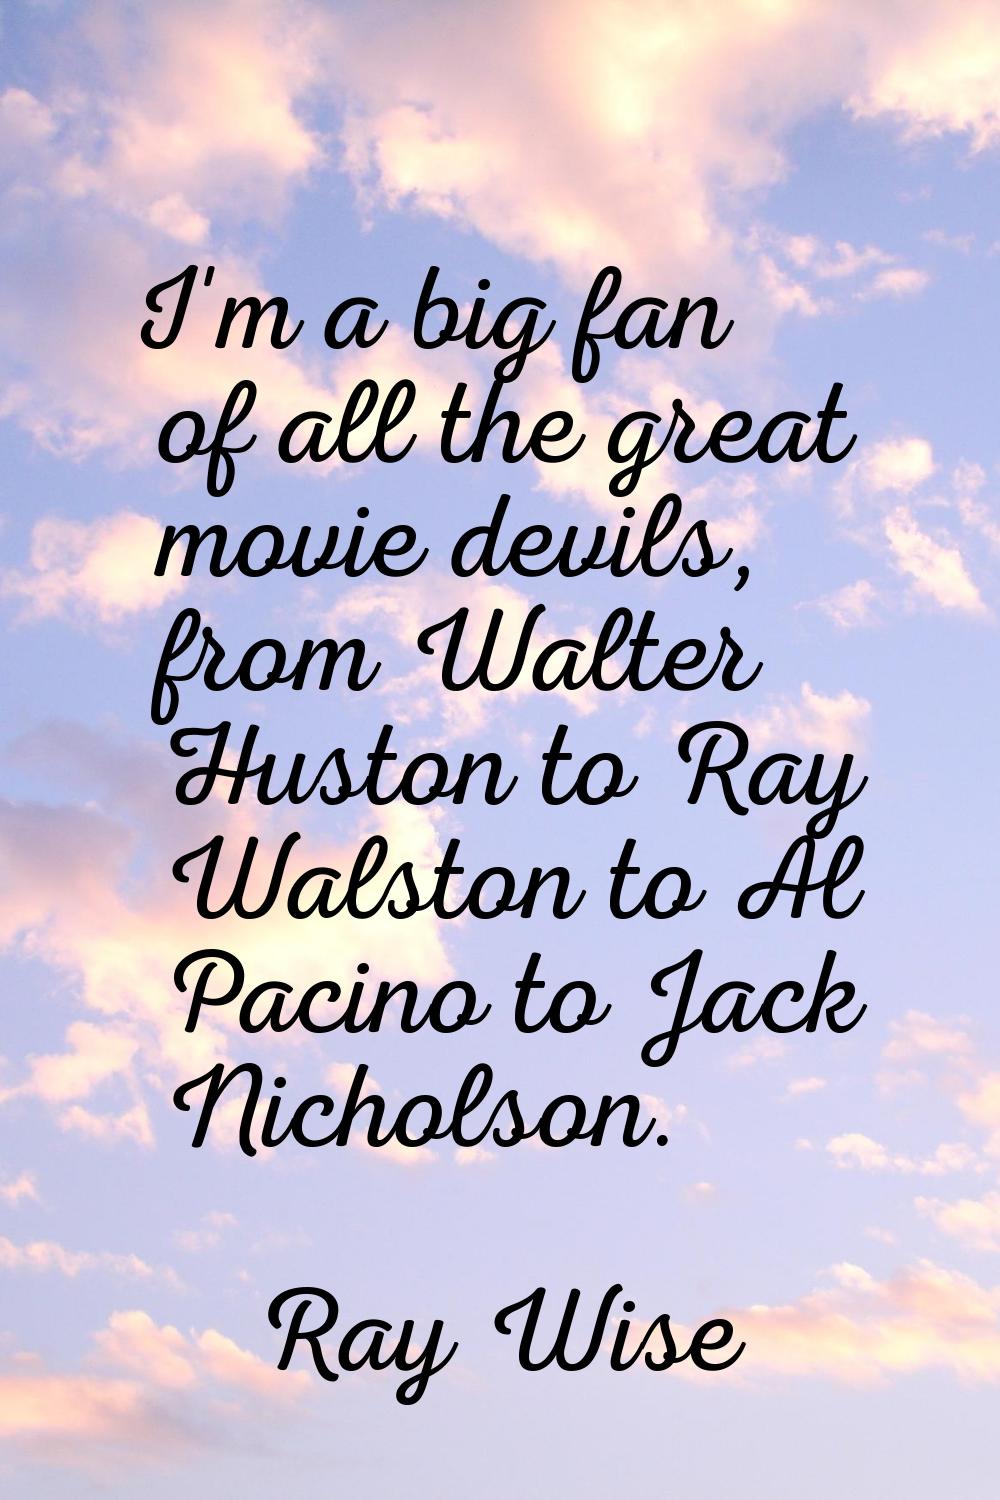 I'm a big fan of all the great movie devils, from Walter Huston to Ray Walston to Al Pacino to Jack